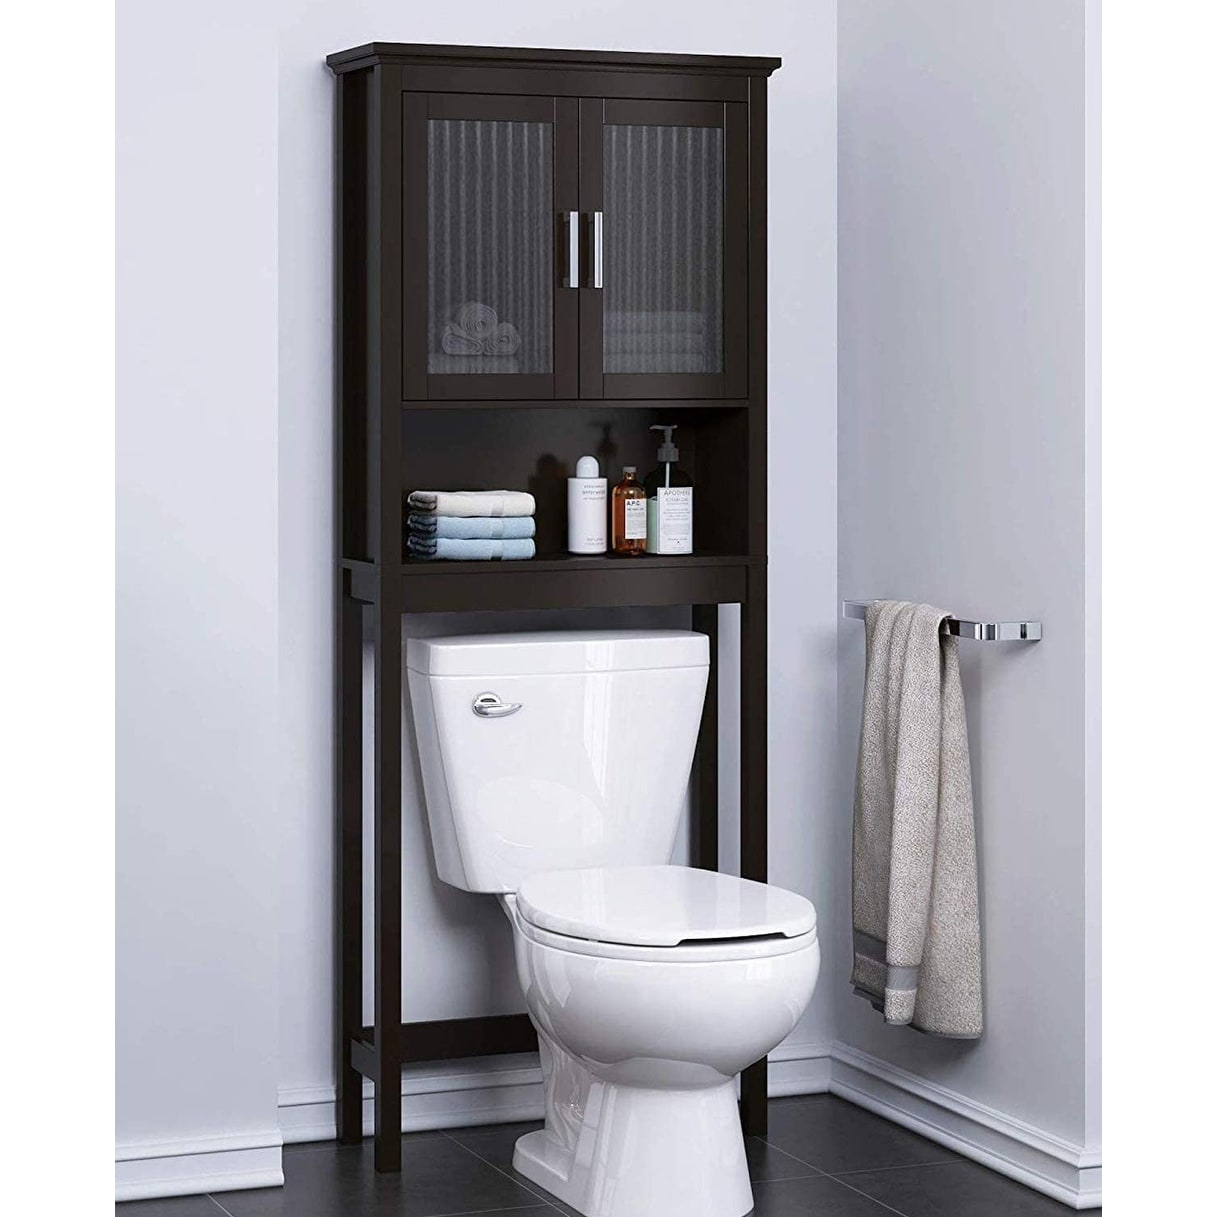 https://ak1.ostkcdn.com/images/products/is/images/direct/0d2a0d0f968ea439106ce0b47a4c8ab179698541/Spirich-Home-Bathroom-Shelf-Over-The-Toilet%2C-Bathroom-Cabinet-Organizer-with-Moru-Tempered-Glass-Door.jpg